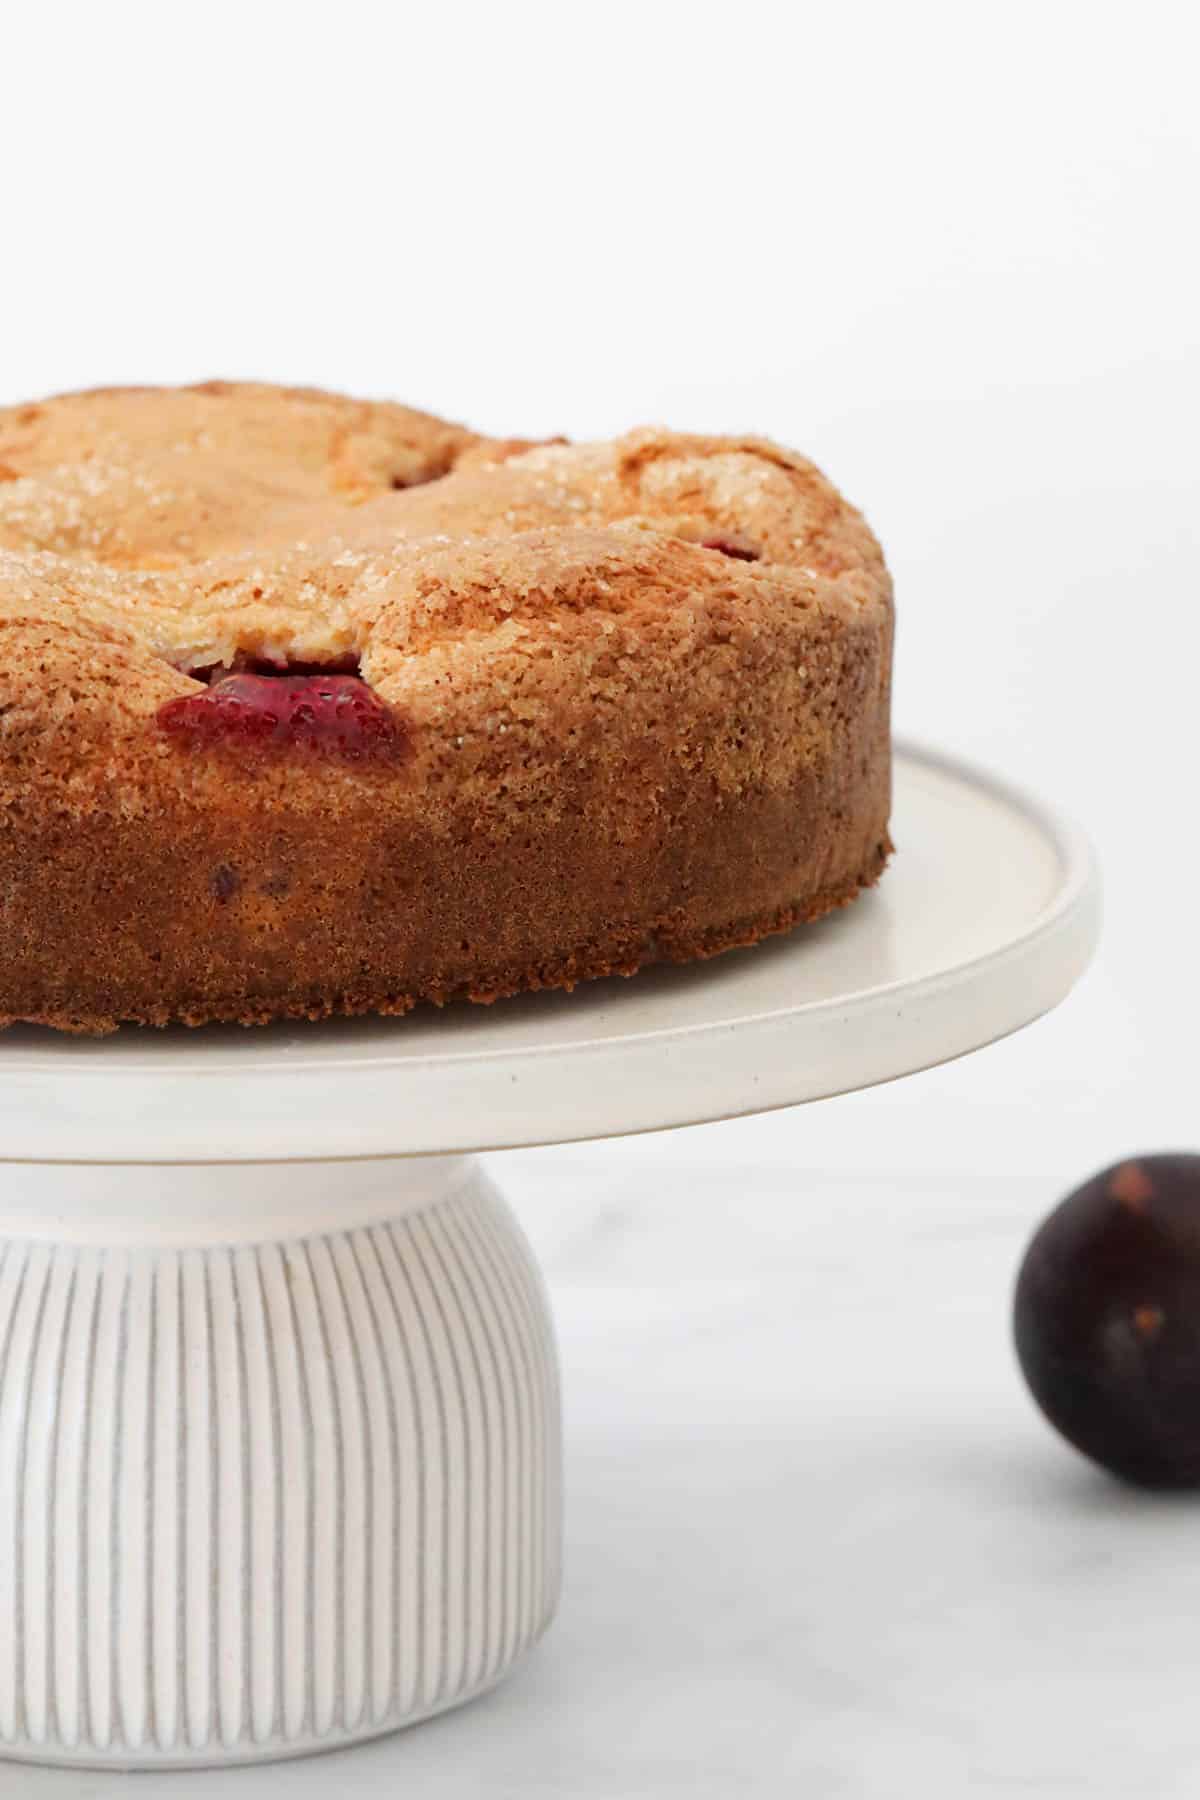 The baked plum cake on a white cake stand.